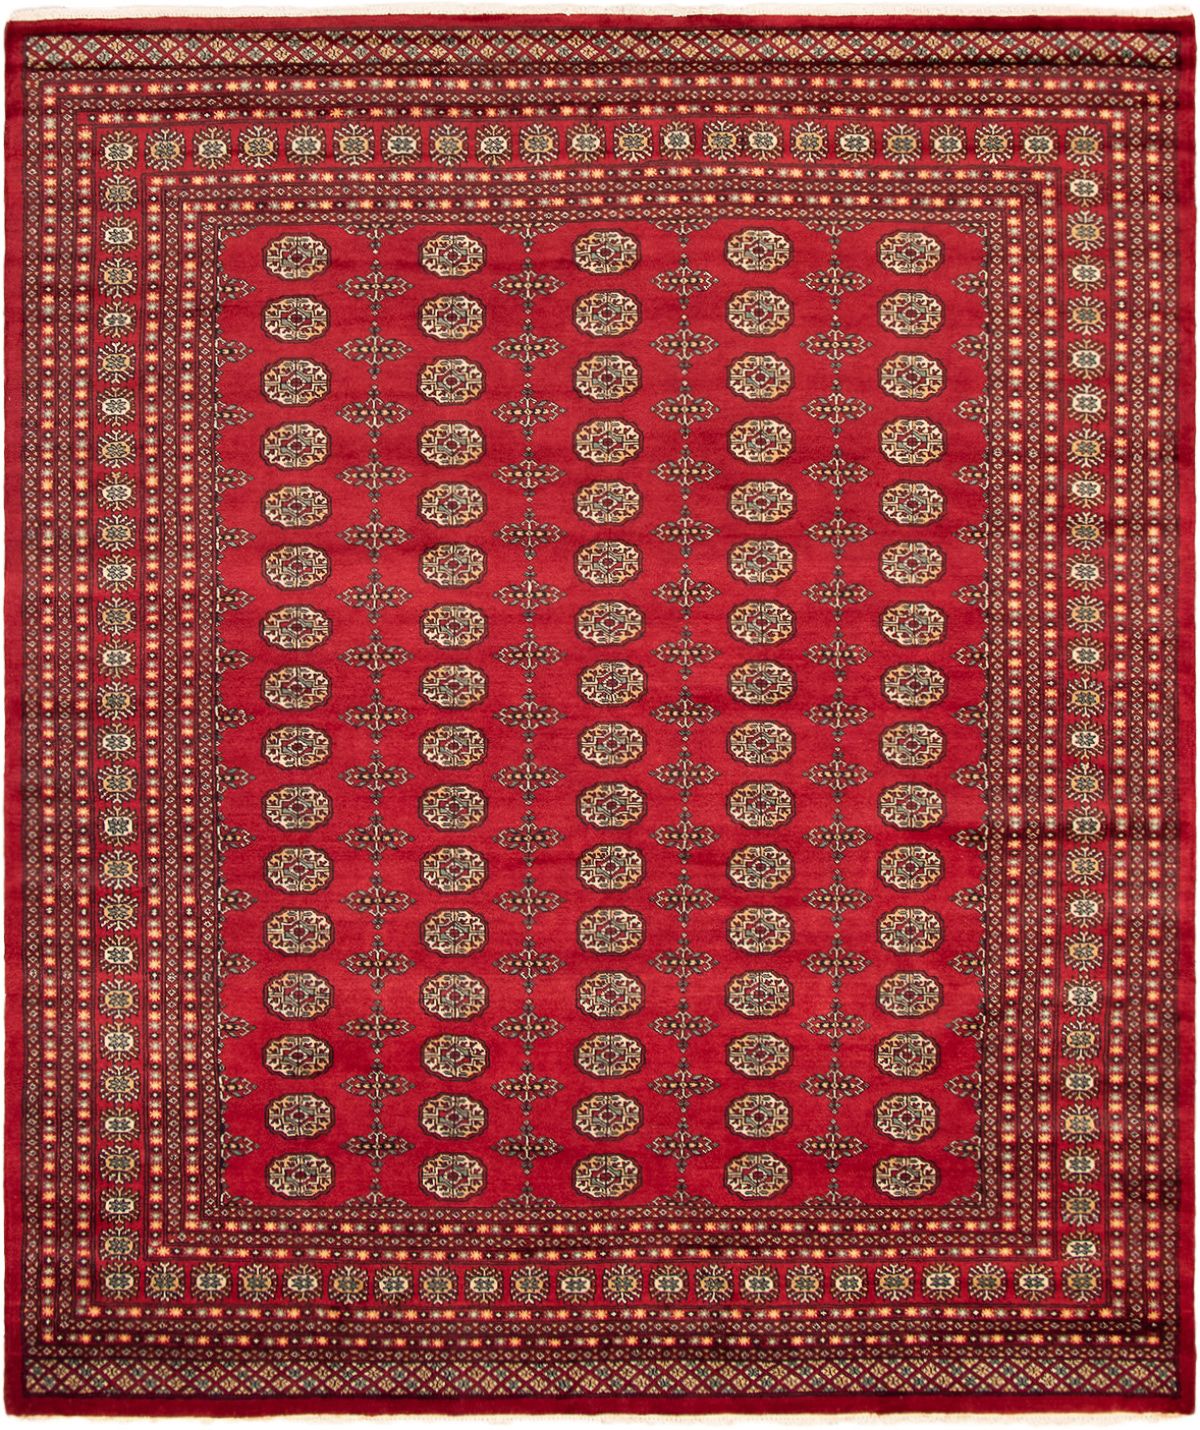 Hand-knotted Finest Peshawar Bokhara Red Wool Rug 8'0" x 10'2"  Size: 8'0" x 10'2"  